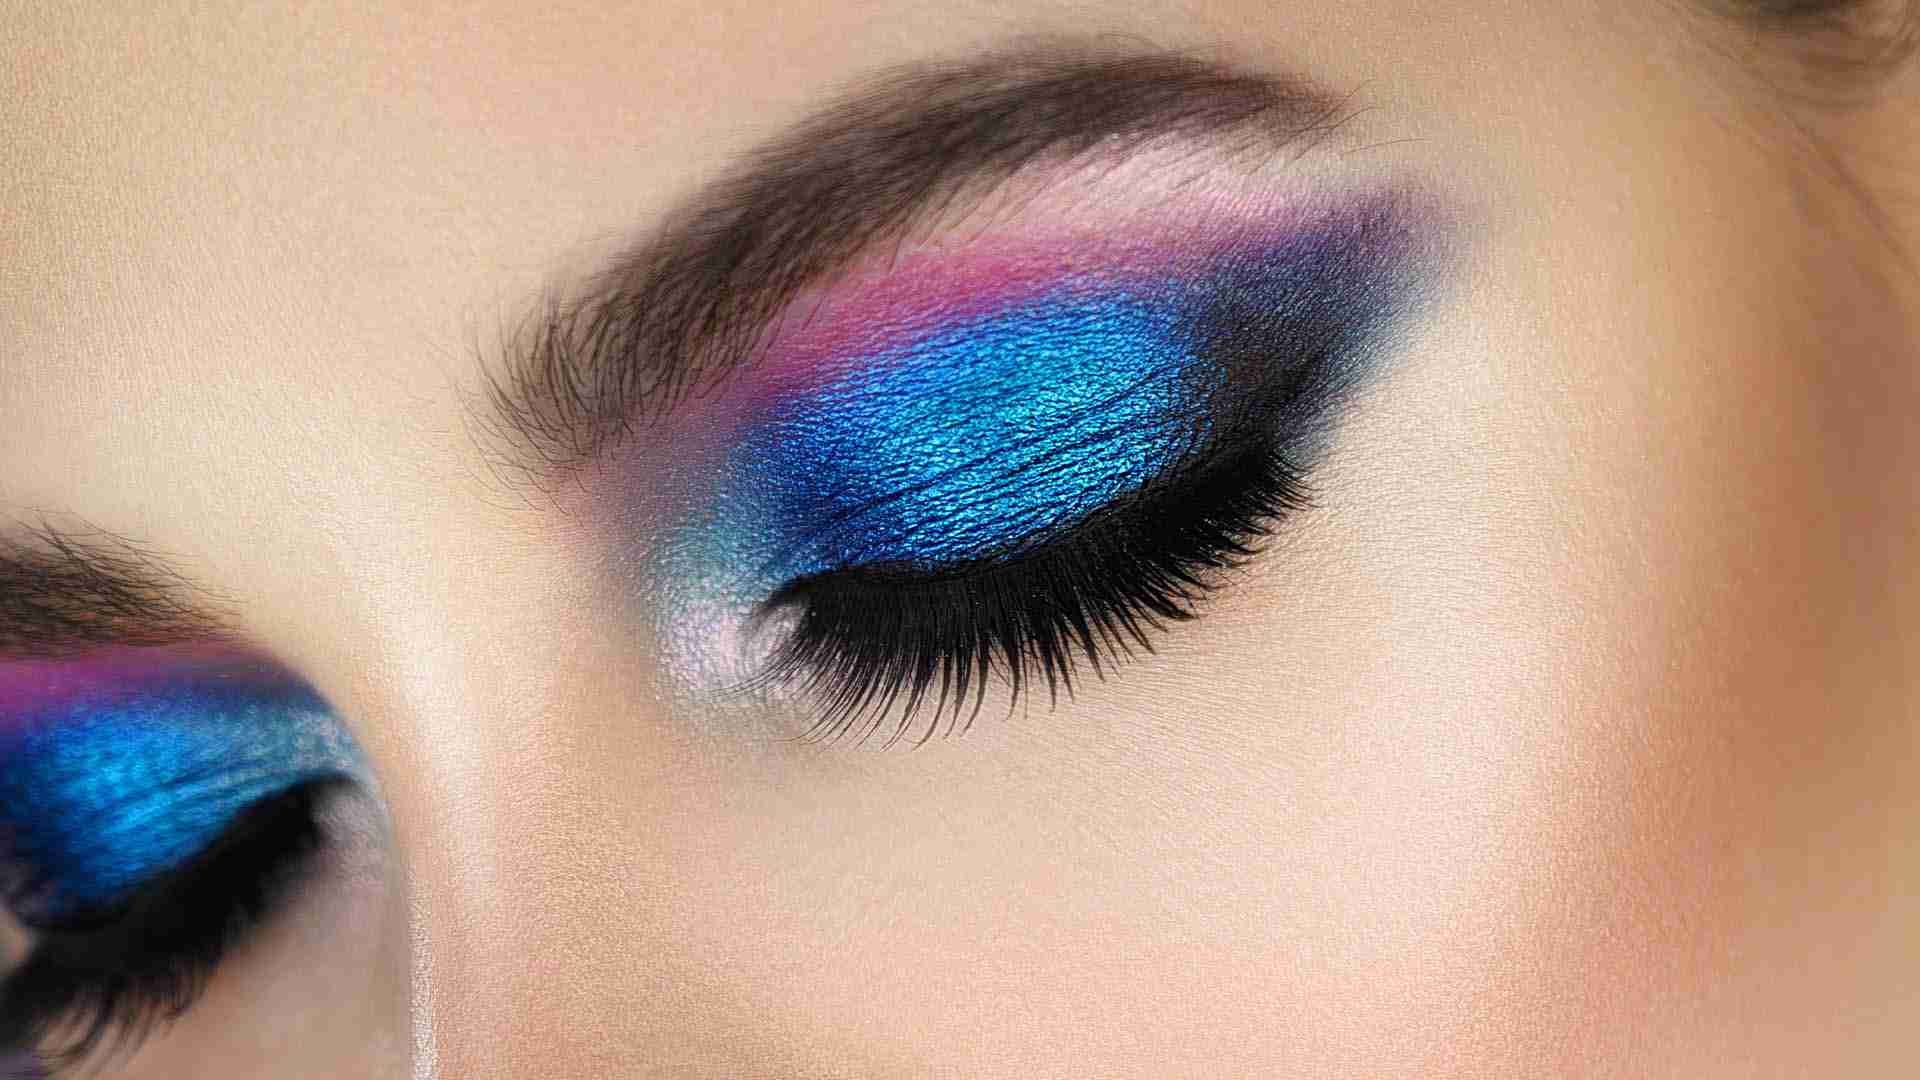 Blue Eyeshadow and White Hair Cartoon Characters - wide 4